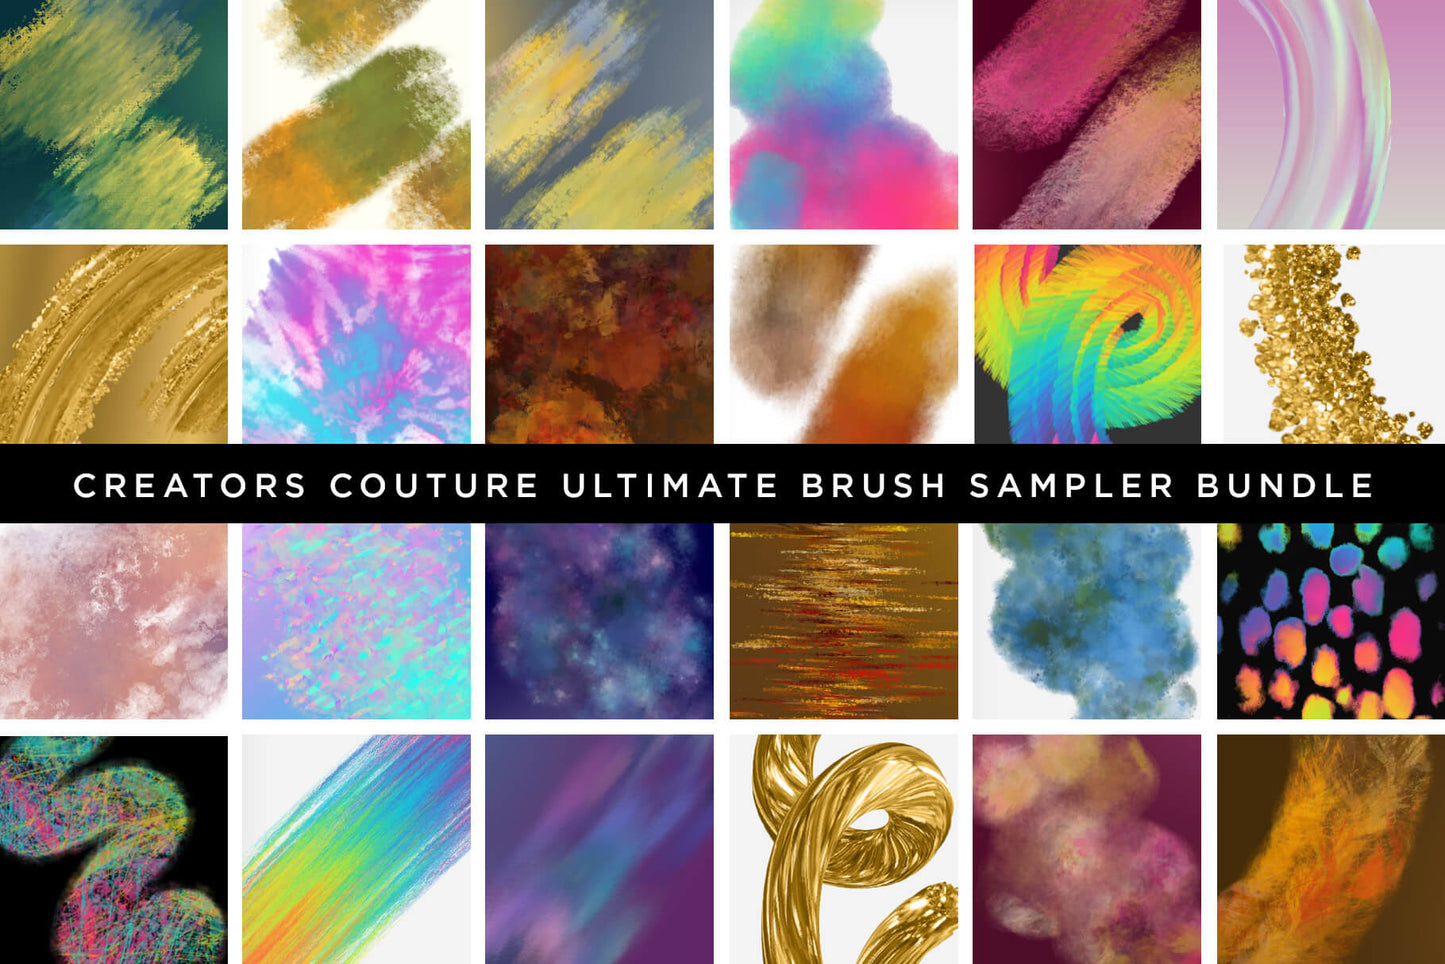 preview of multicolor photoshop brushes in bundle, including impressionist photoshp brushes, wet paint special effects brushes, gold effects via photoshop brushes, tie-dye brushes, watercolor brushes